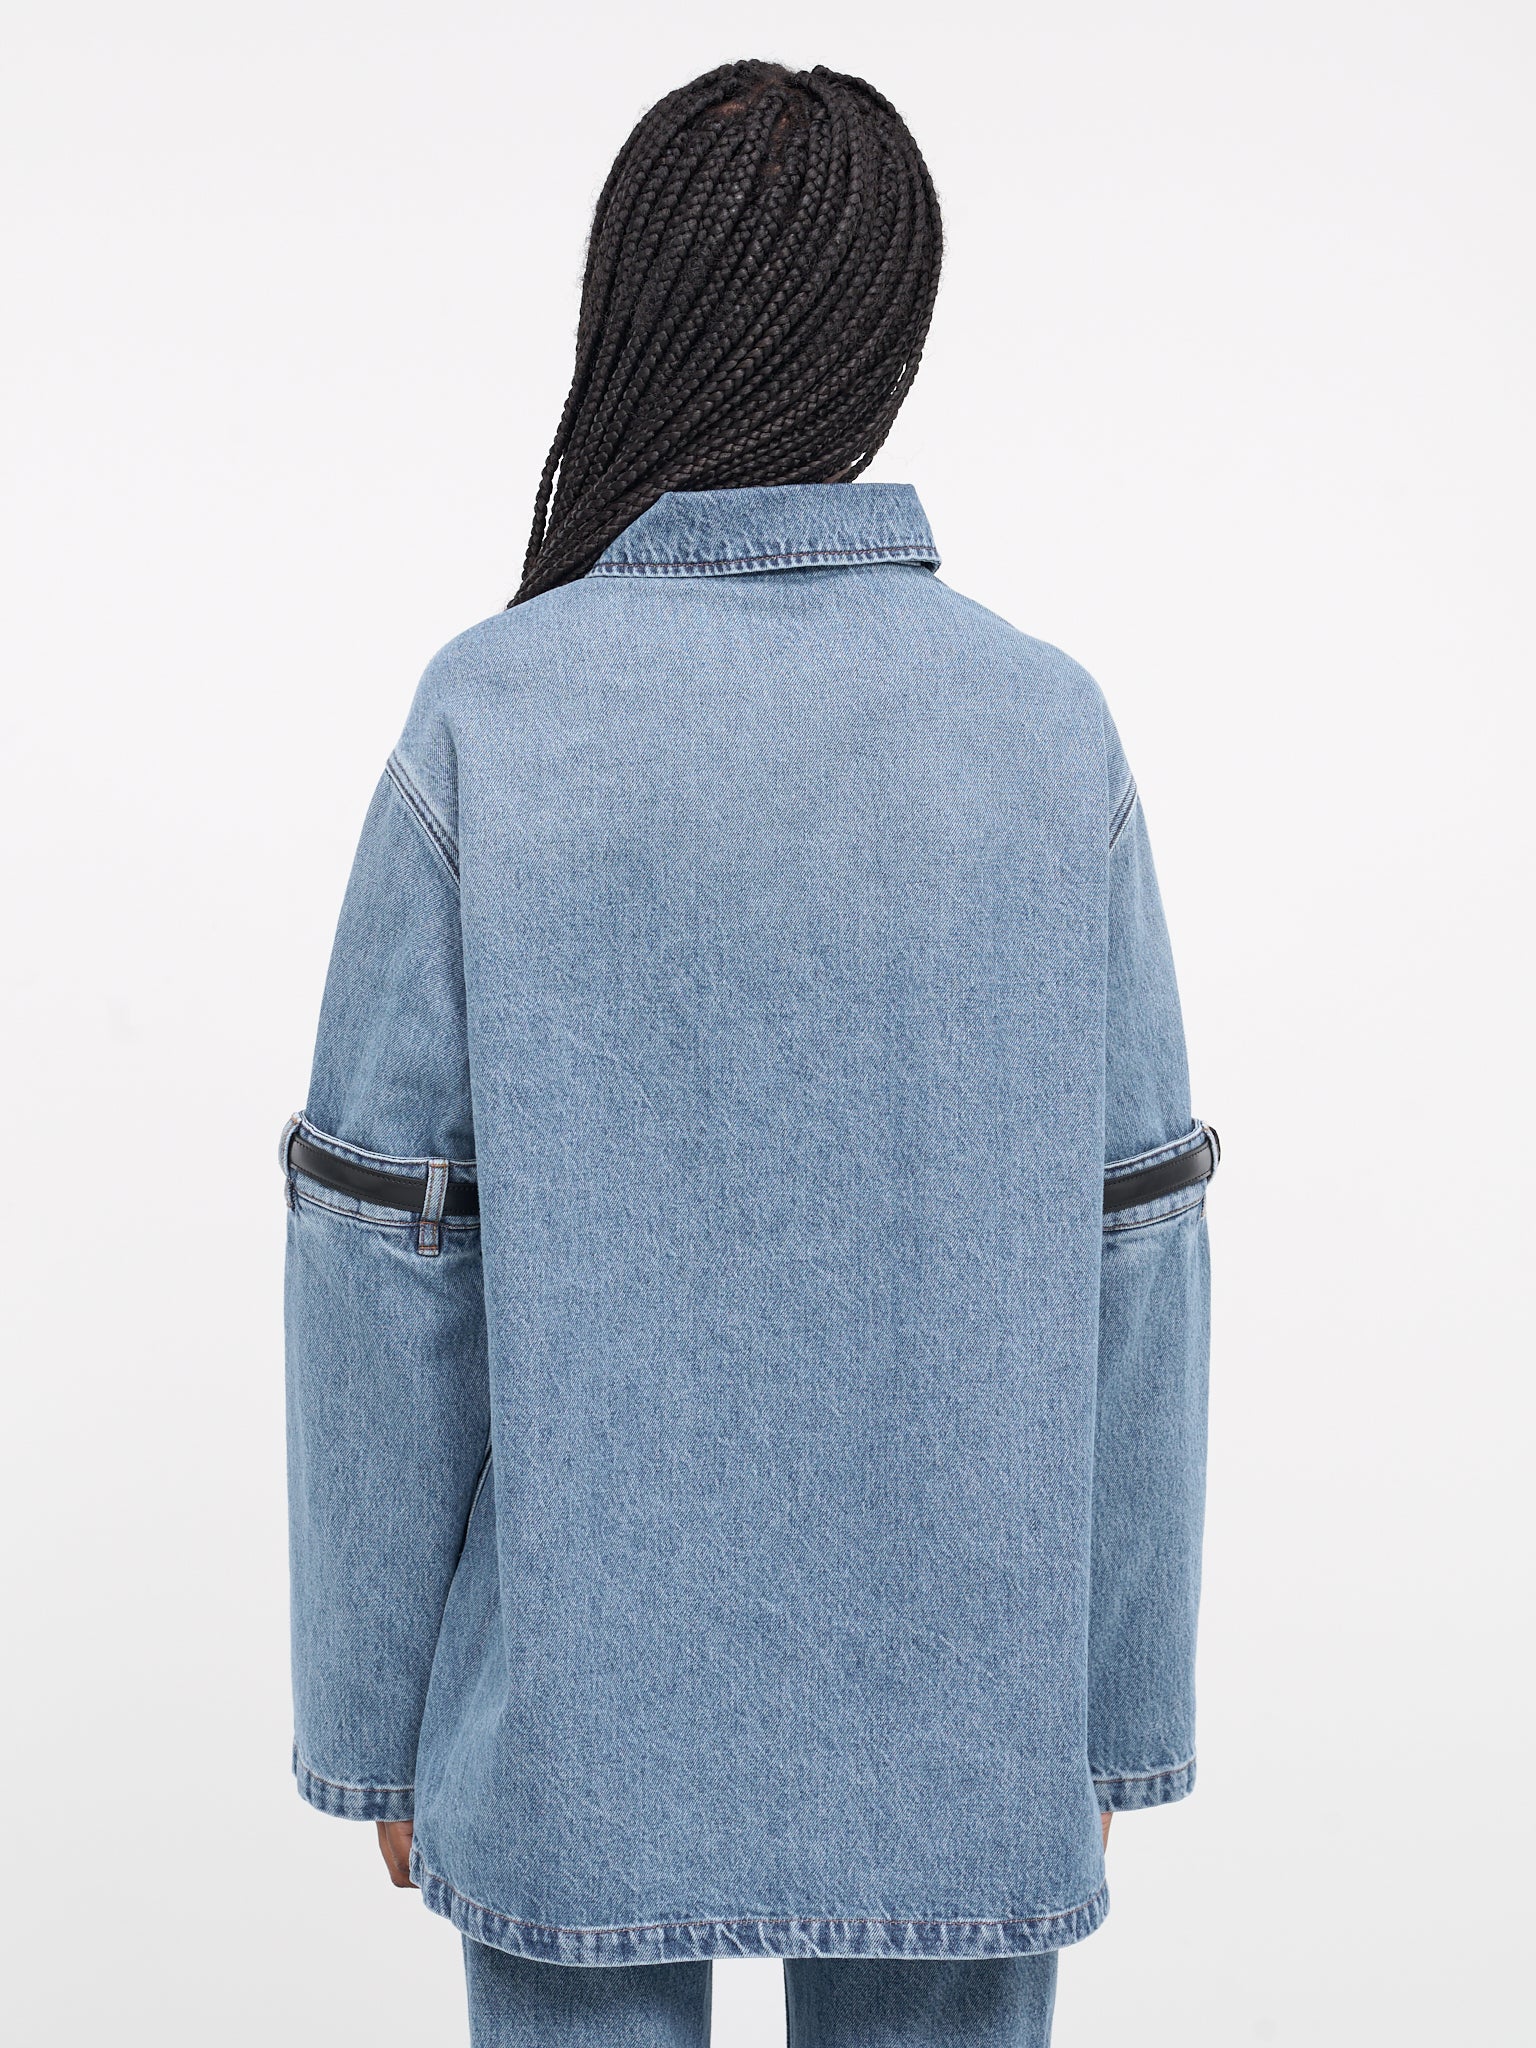 Open Elbow Jacket (COPCH36202-WSHED-BLUE)